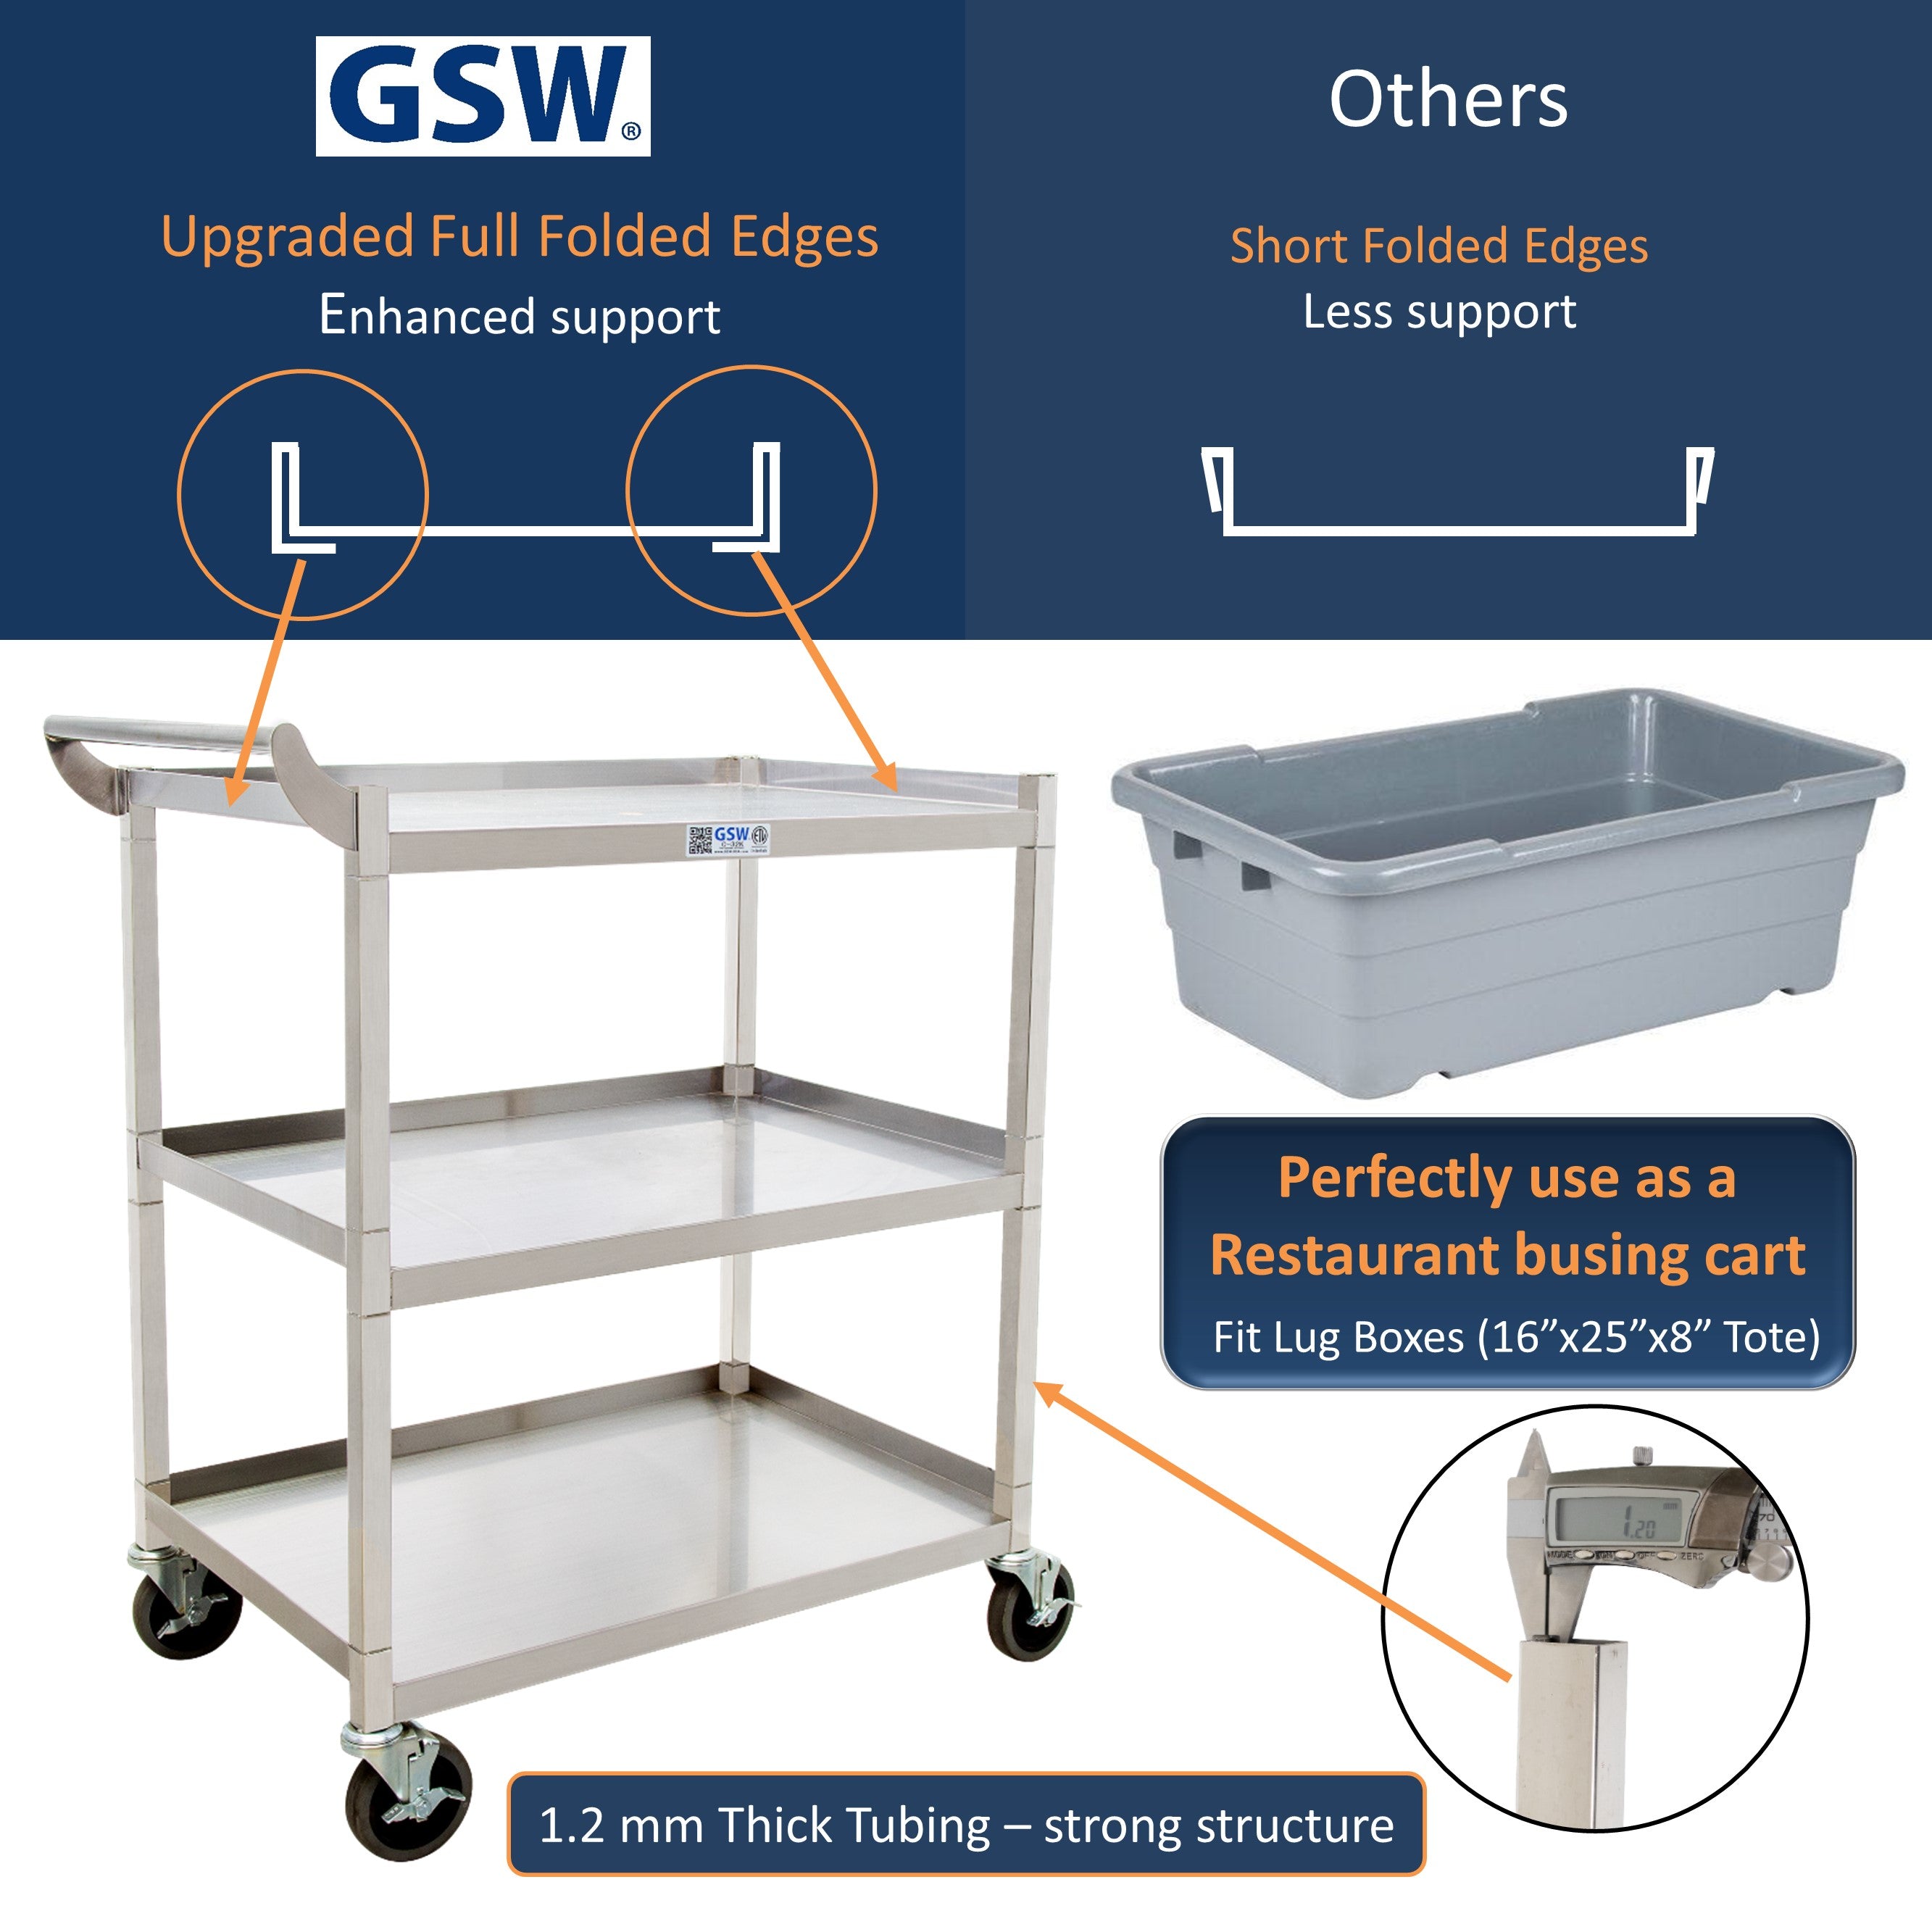 GSW C-32K Stainless Steel Solid 1-Inch Tubular Utility Cart with 4-3/4 Swivel Casters (29-1/4"W x 17-3/4"D x 35-1/2"H)